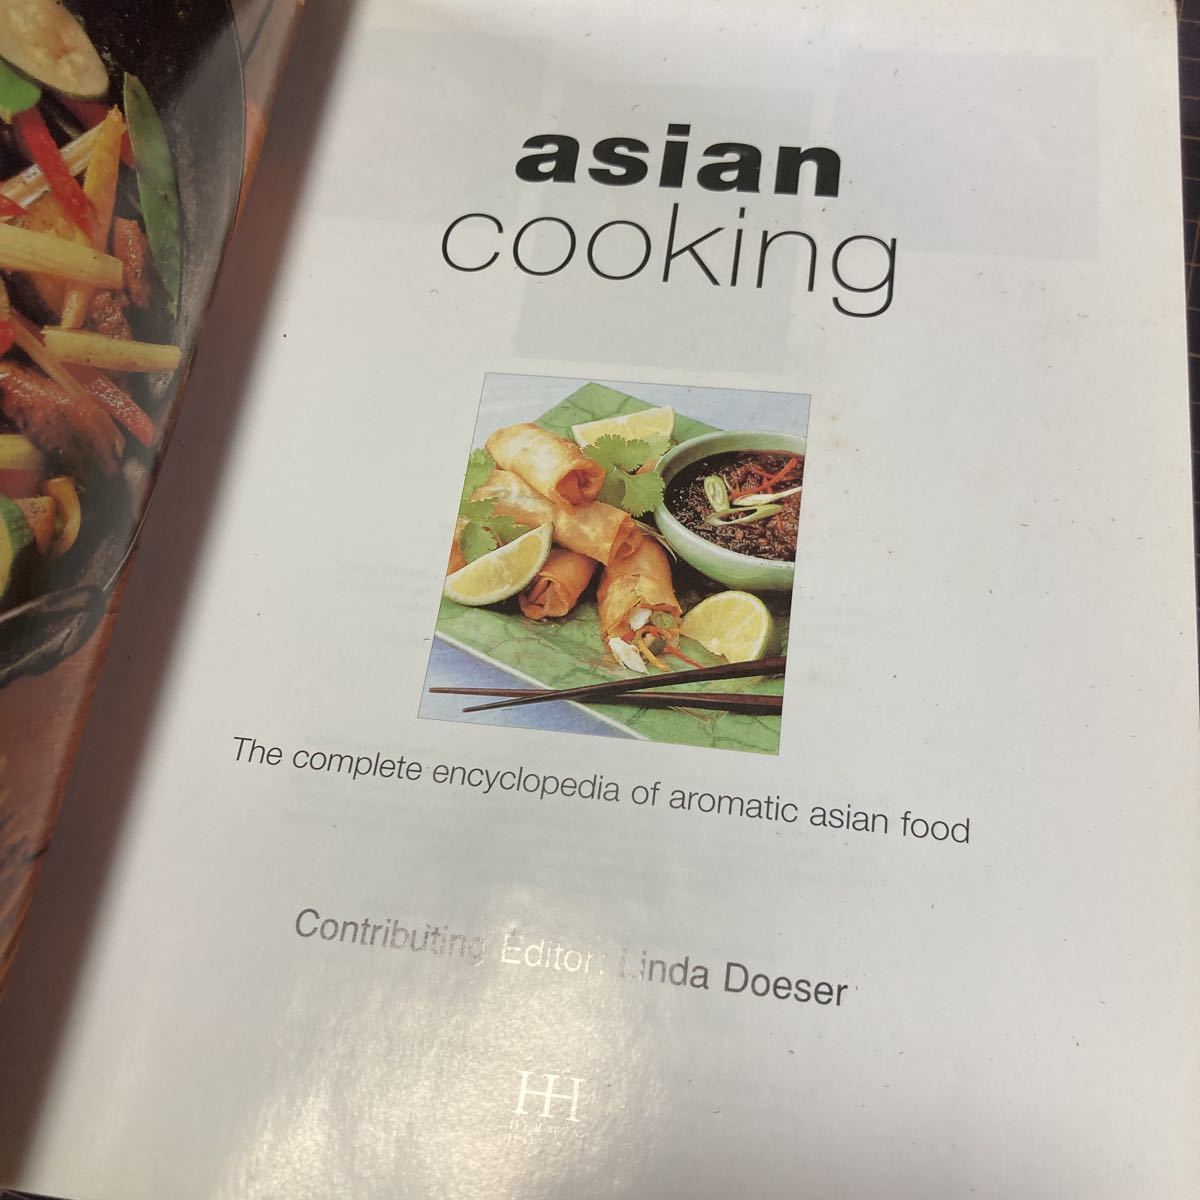  foreign book English Asian cooking asian cooking linda doeser recipe book ethnic 